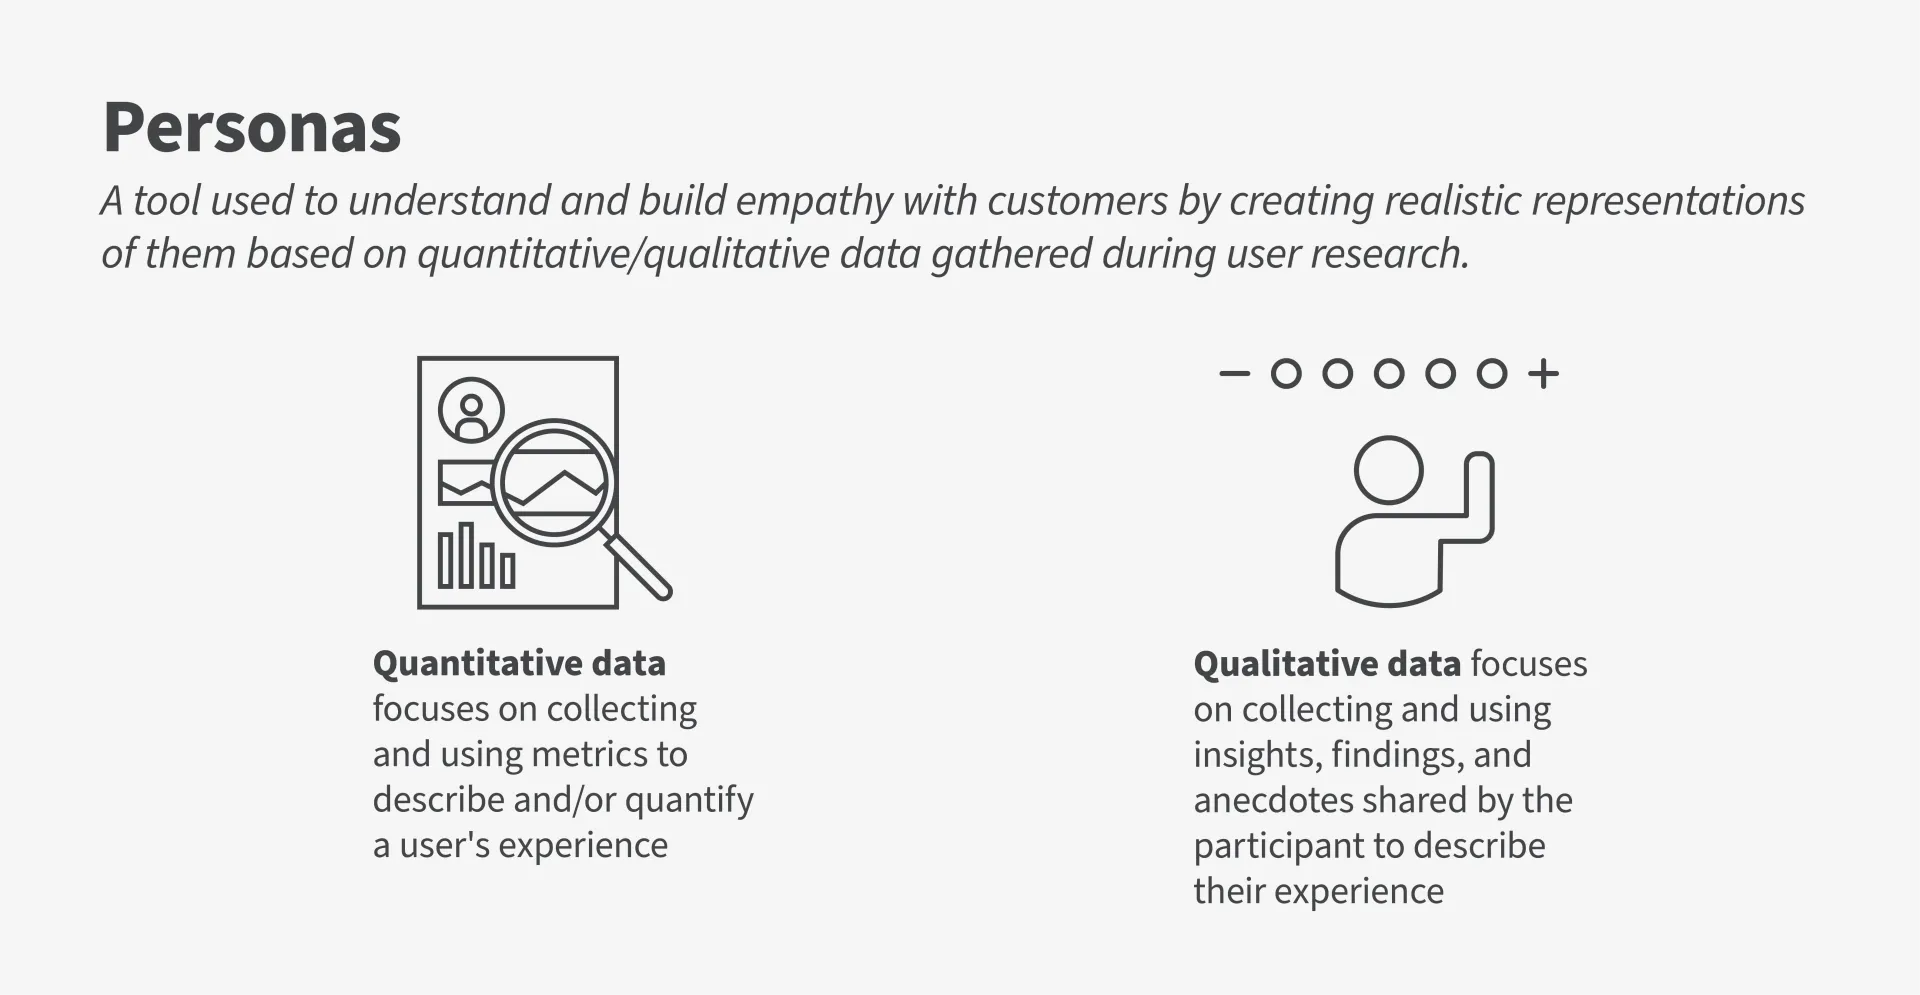 Infographic with two icons showing the difference between quantitative and qualitative data and how they are used to create personas.